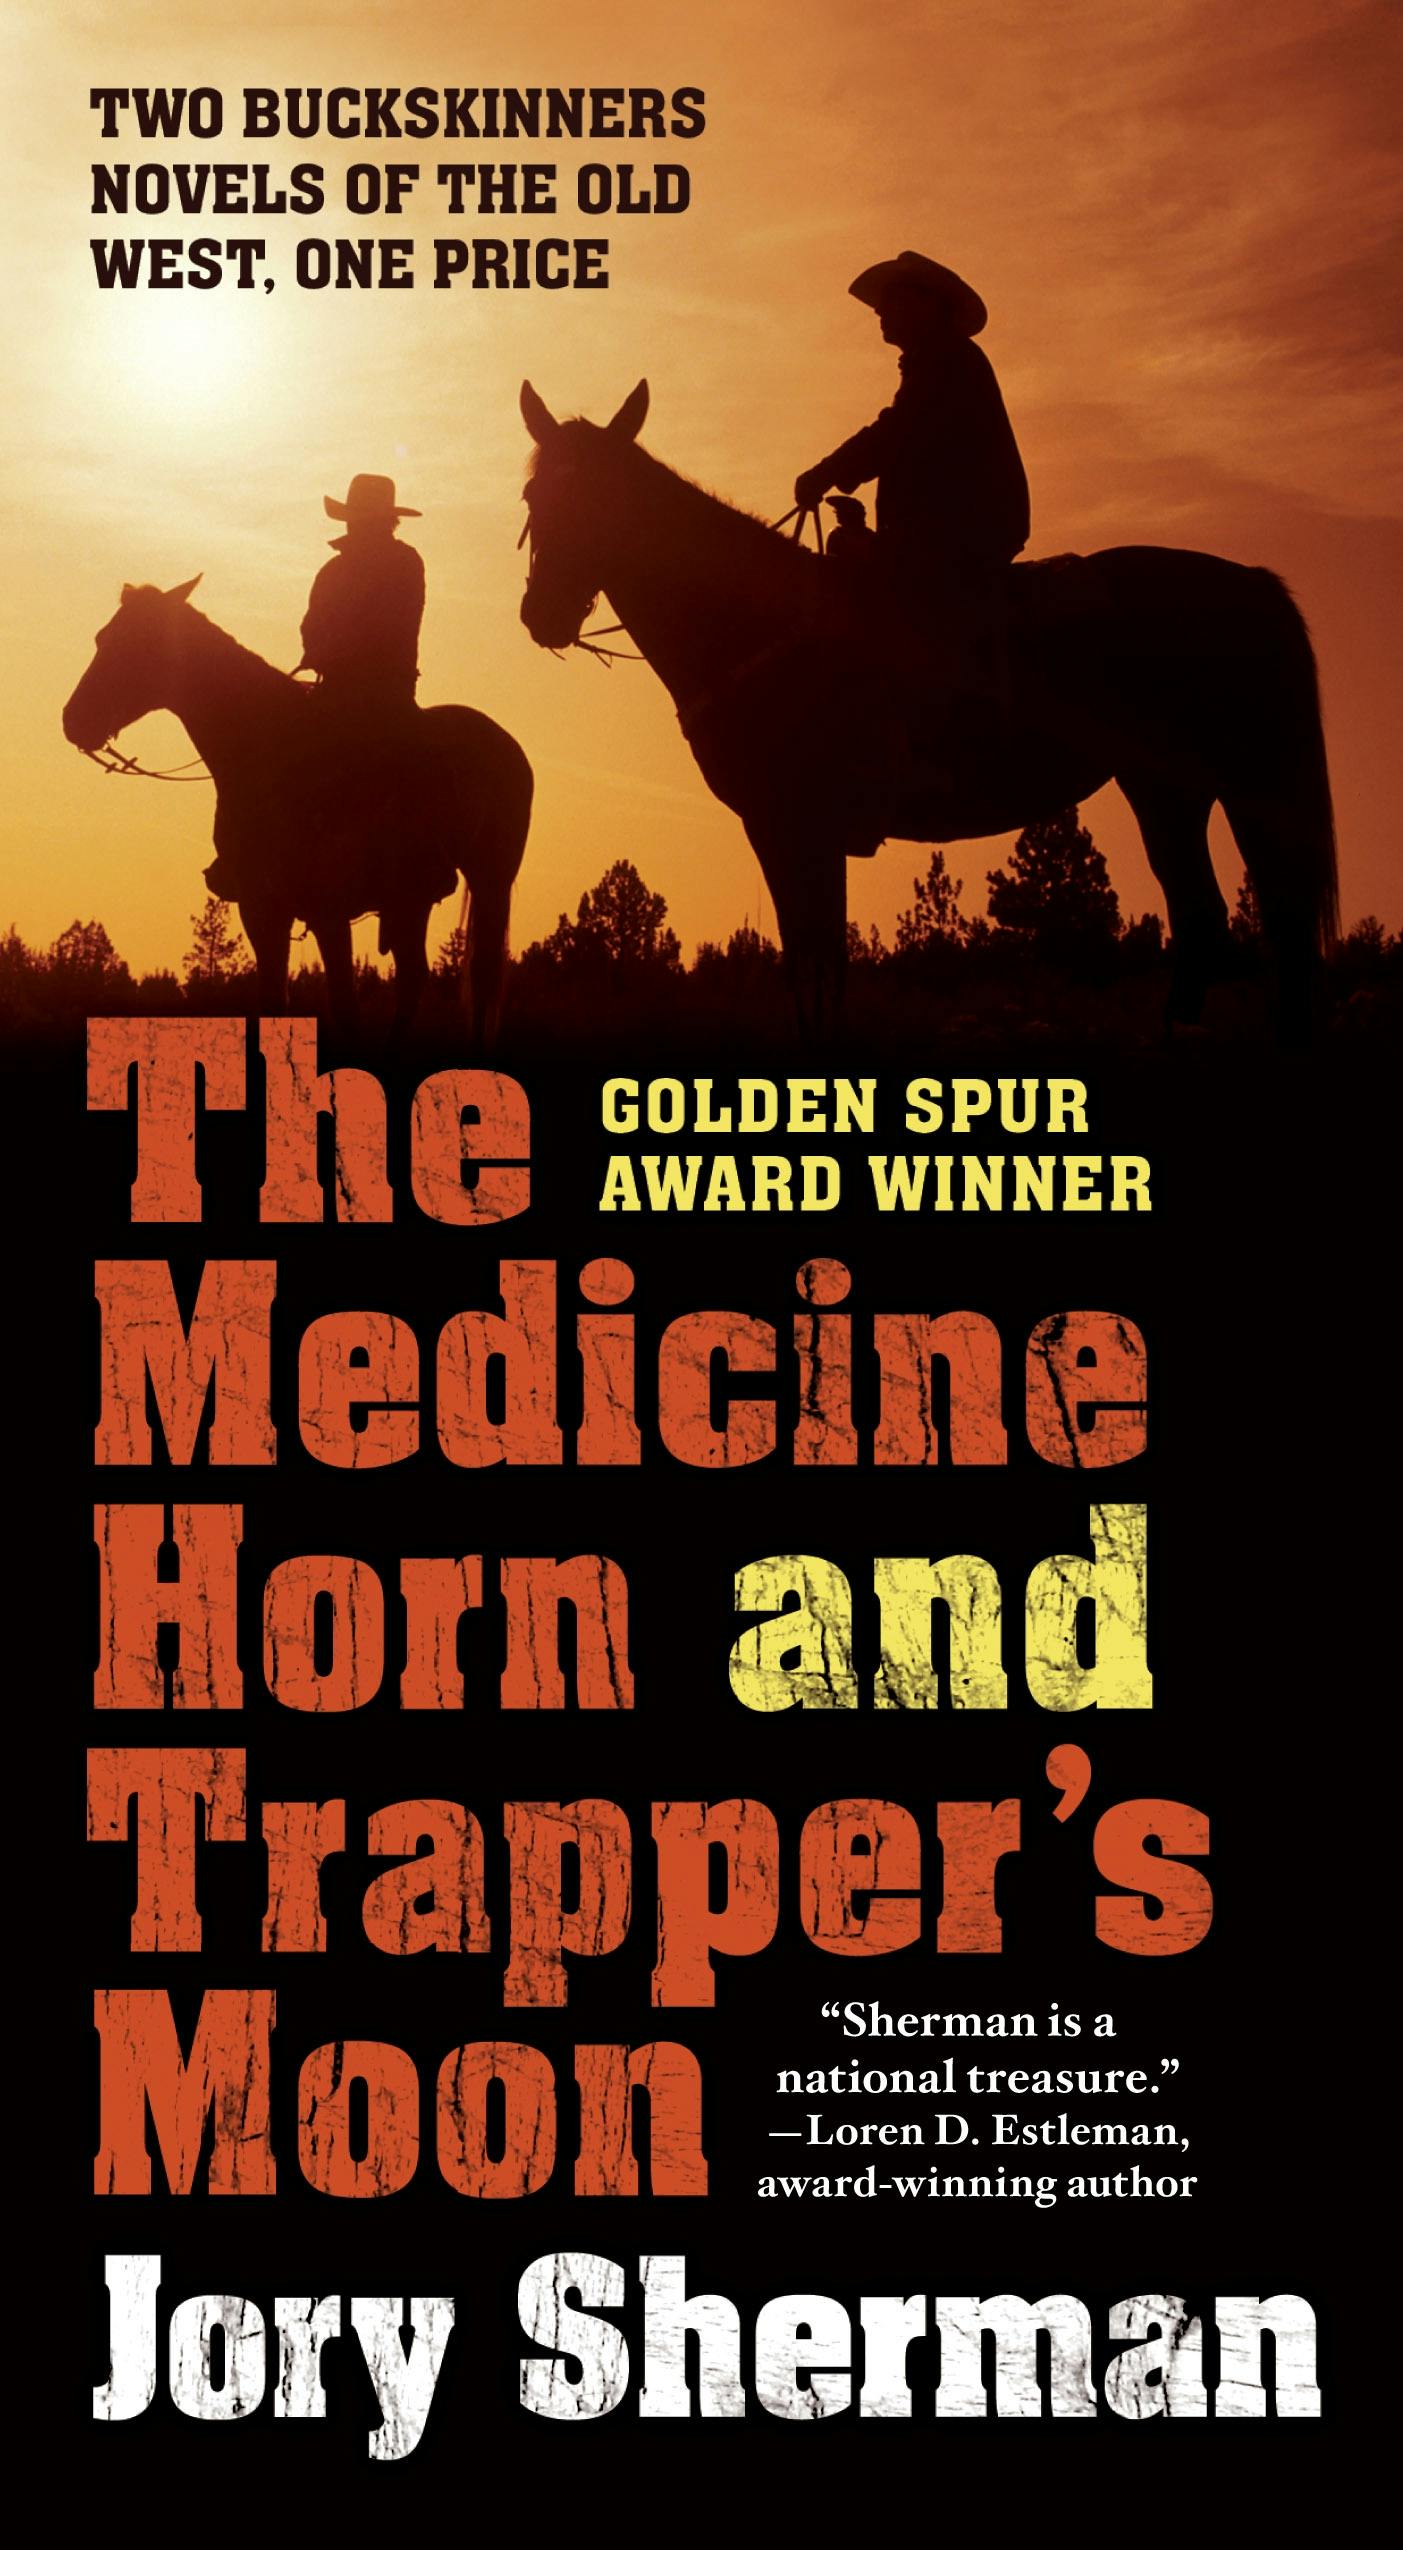 Cover for the book titled as: The Medicine Horn and Trapper's Moon